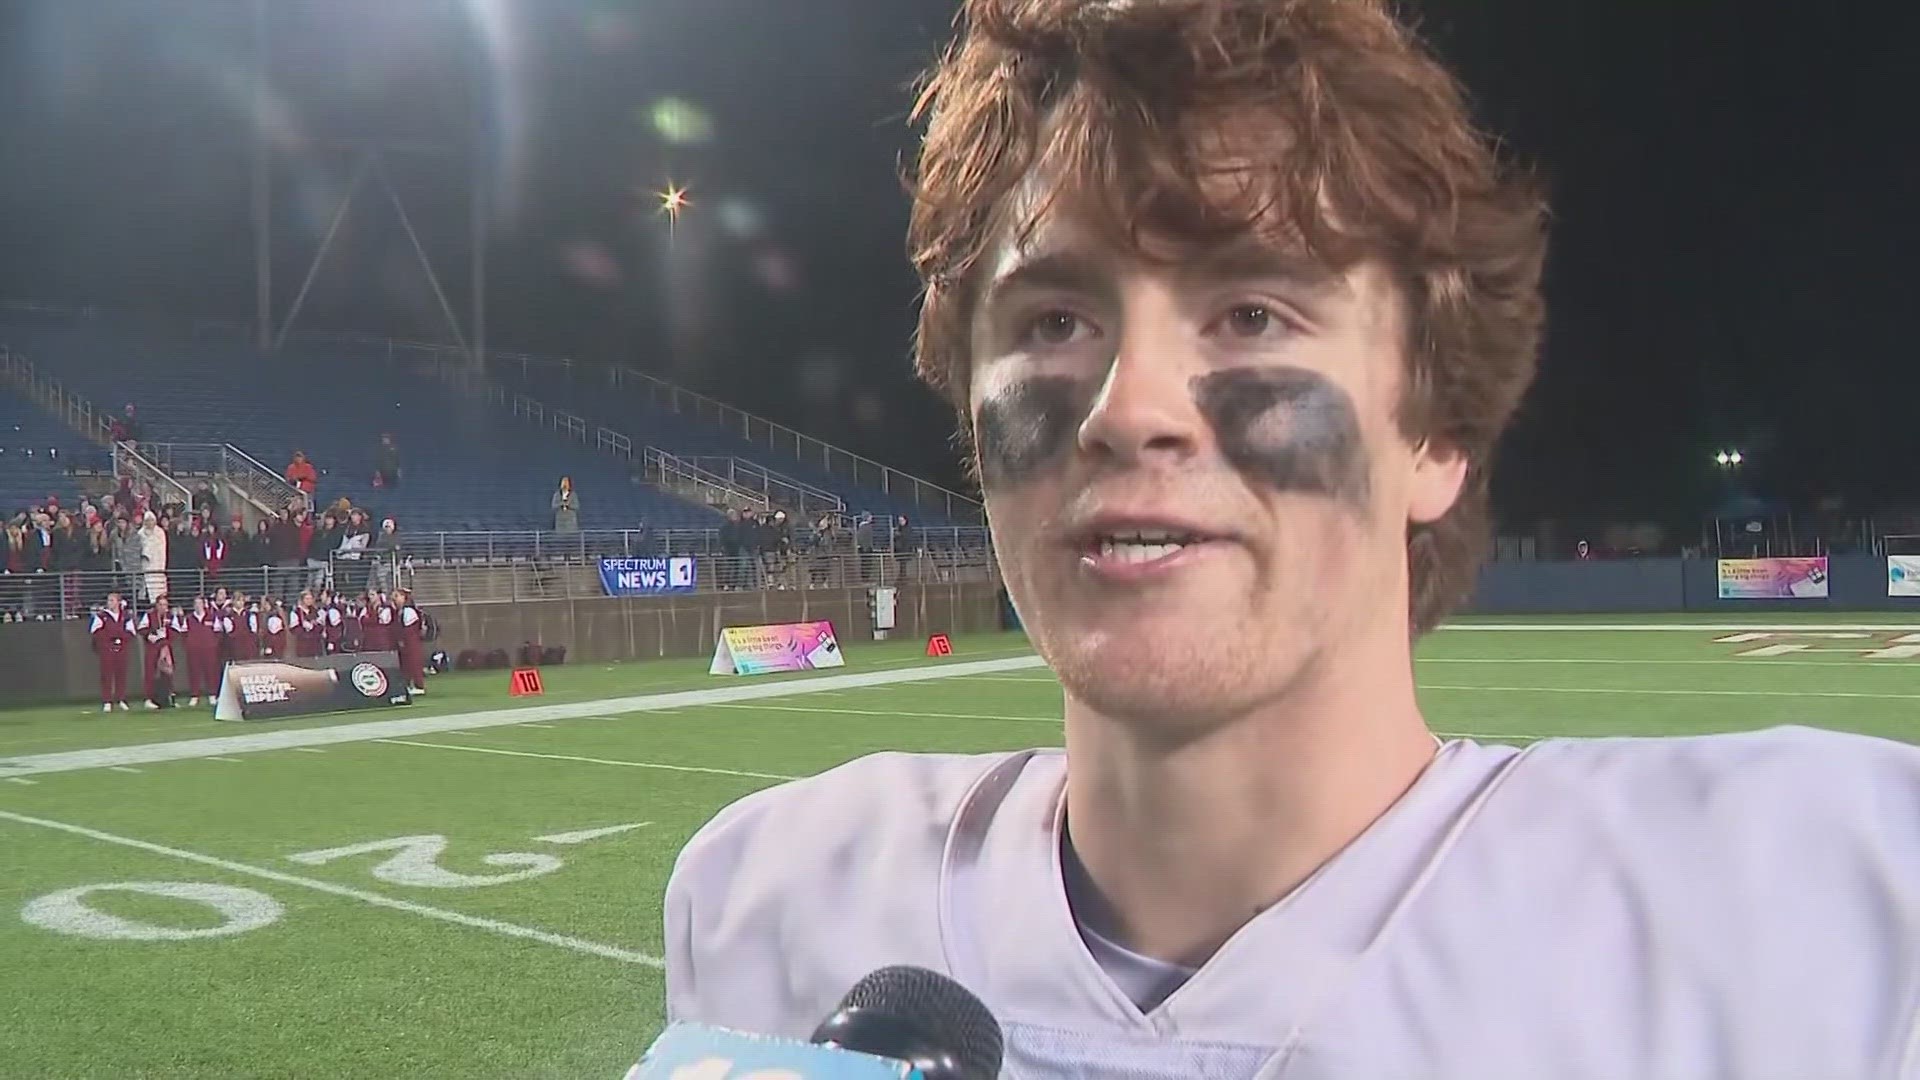 This week's 10TV Athlete of the Week is Bishop Watterson quarterback A.J. McAninch.